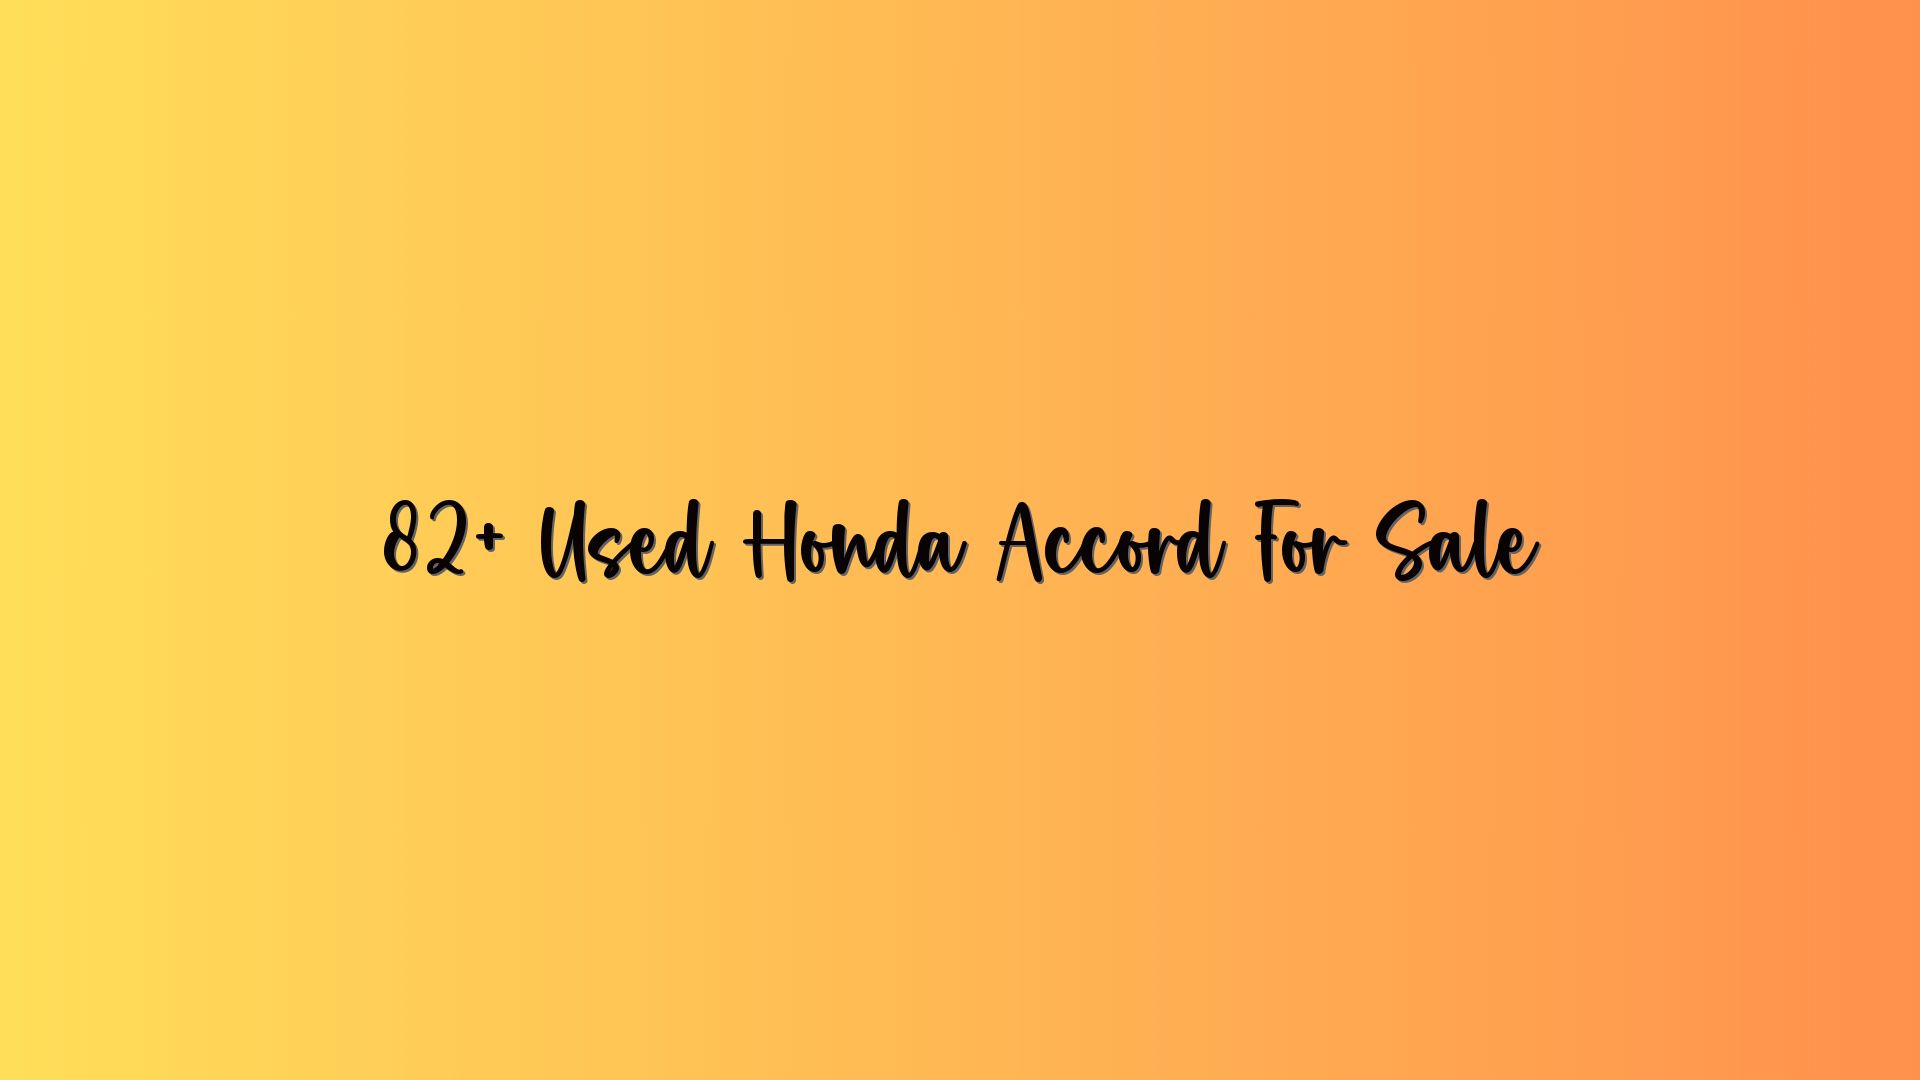 82+ Used Honda Accord For Sale